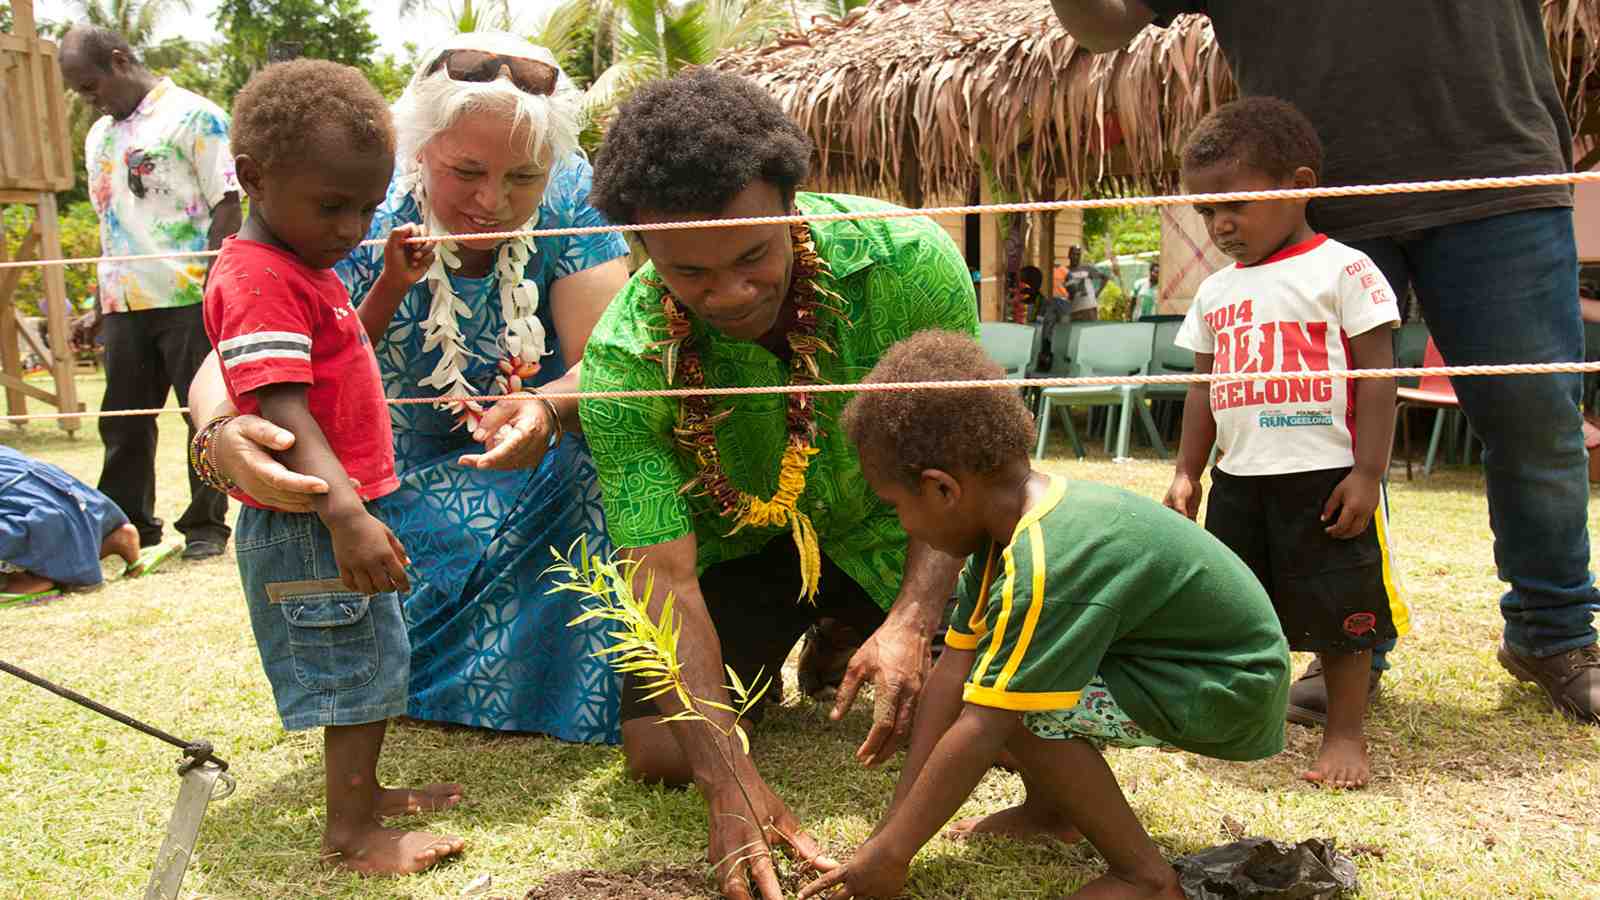 Victoria University representatives help local children plant a tree at the opening of the new early childhood education centre in Manua, Vanuatu – Hon. Luamanuvao Winnie Laban and Dr Pala Molisa from Victoria University help local school children plant a tree at the opening of the Tauawia Early Childhood Resource and Research Centre in Manua, Vanuatu. Photo: Murray Lloyd Photography.